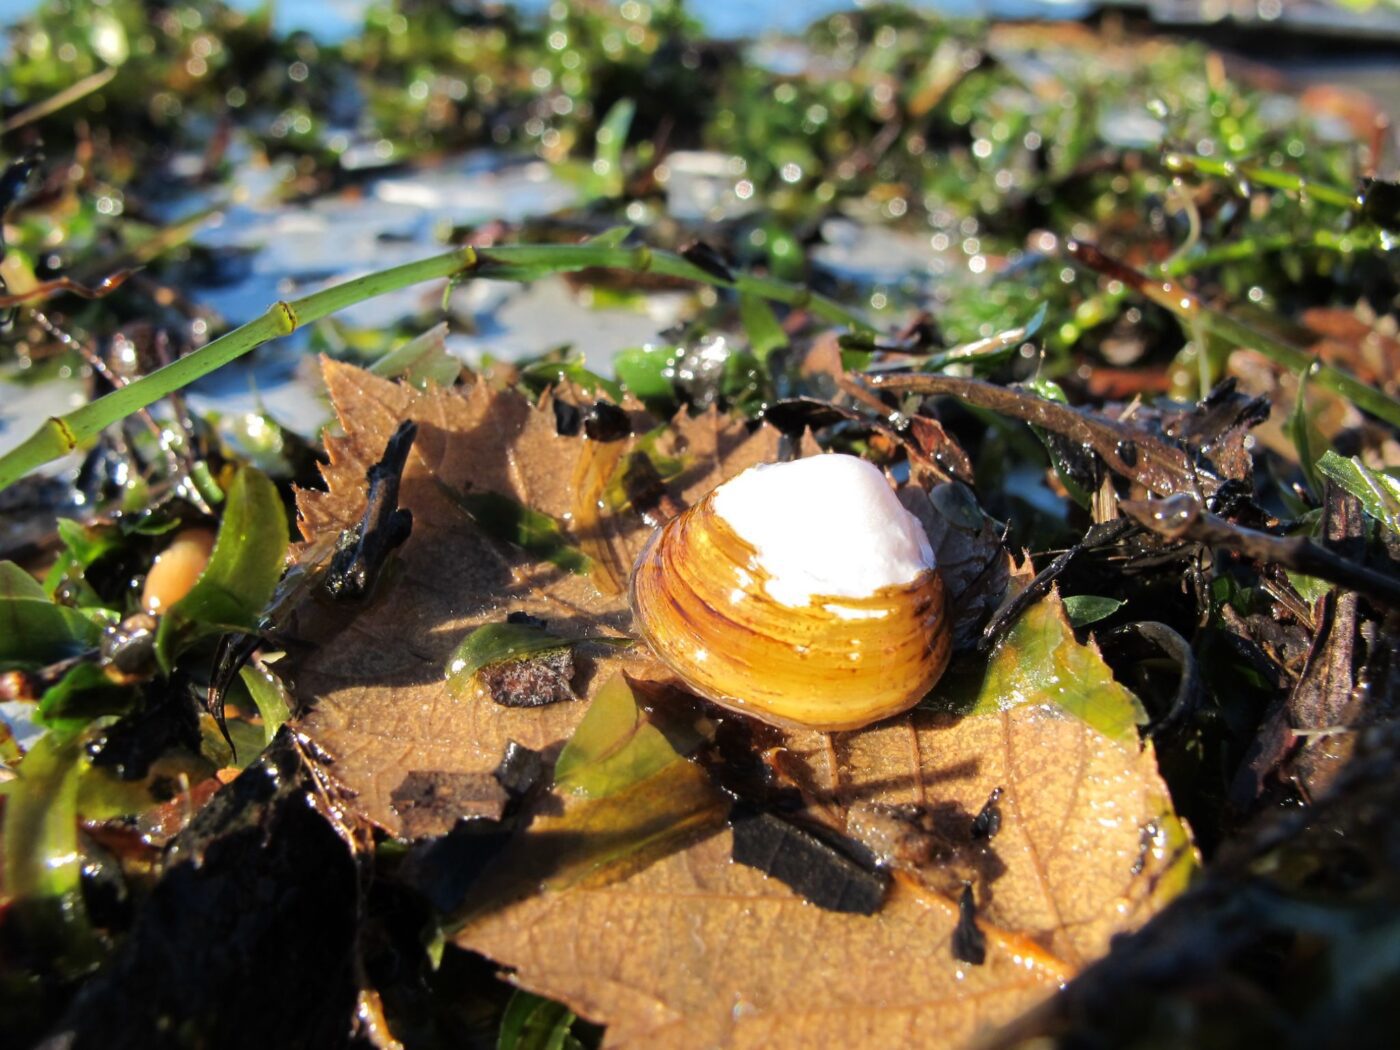 A small clam sitting on a leaf on a bed of vegetation